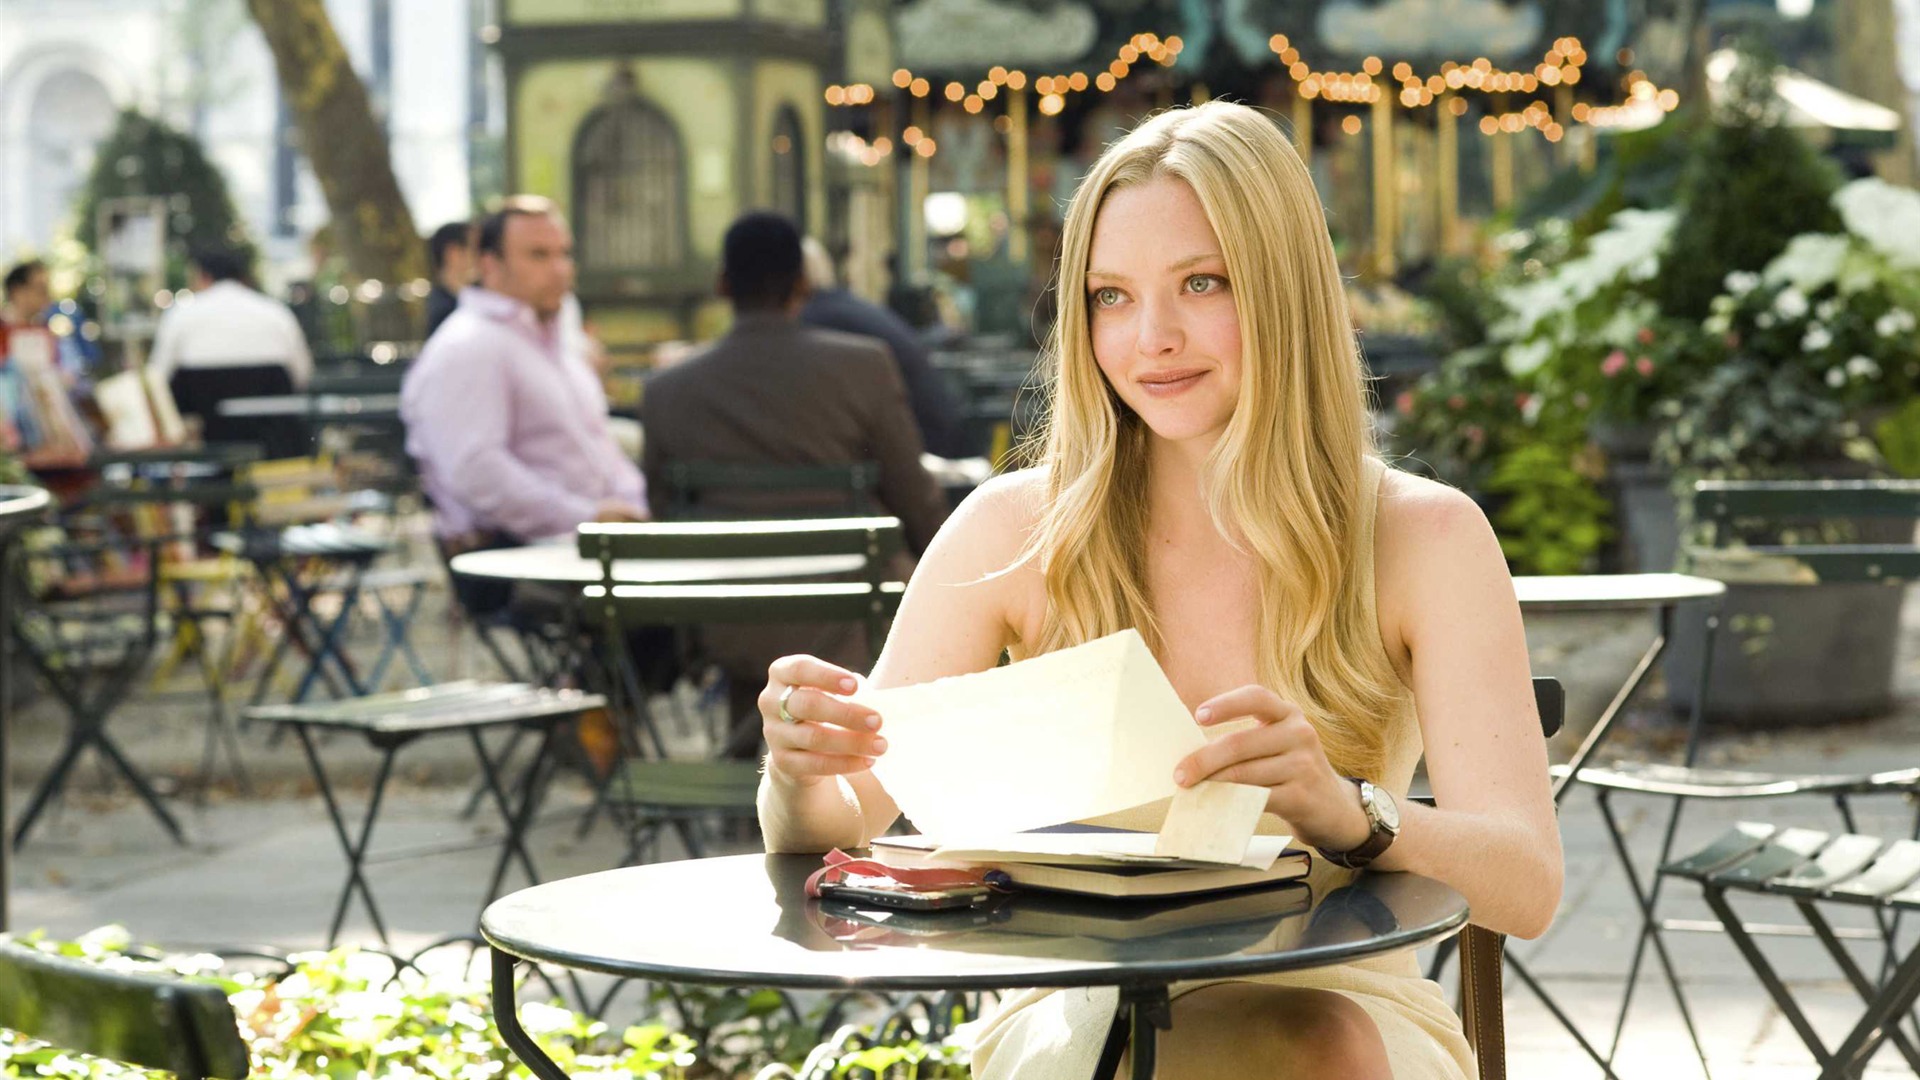 Letters to Juliet 给朱丽叶的信 高清壁纸4 - 1920x1080